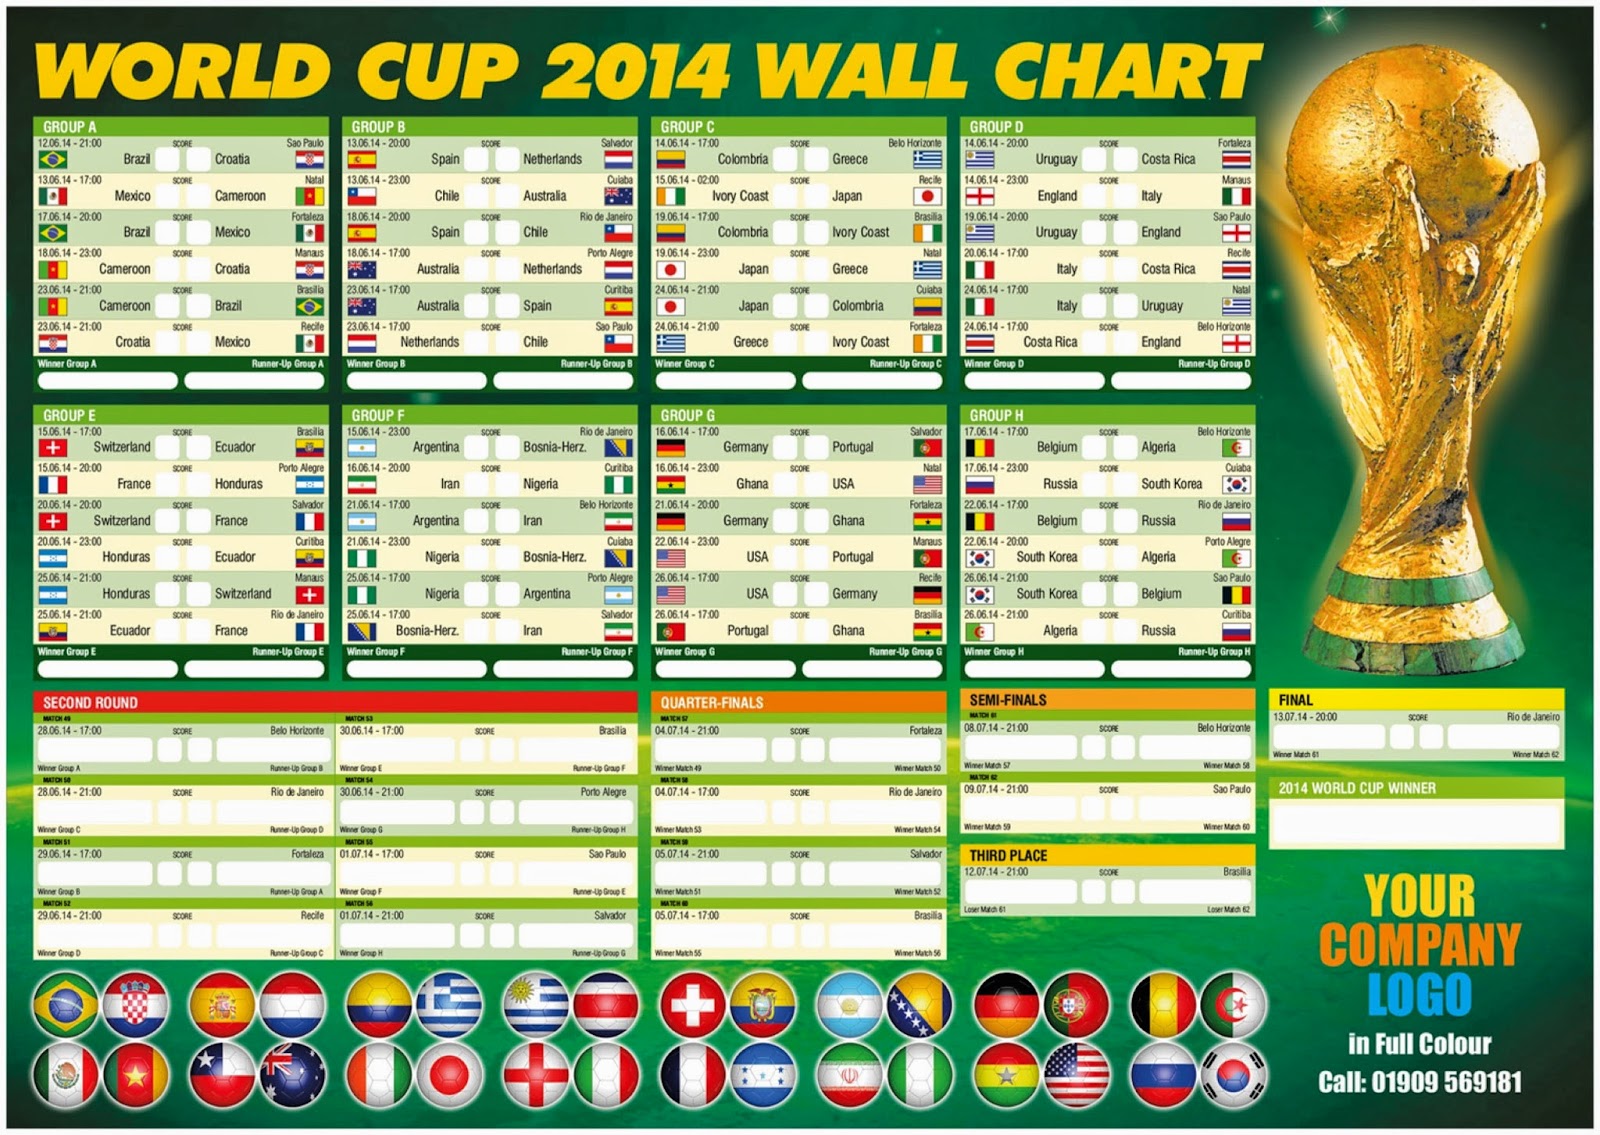 FIFA World Cup Brazil 2014 Information Download World Cup 2014 Brazil